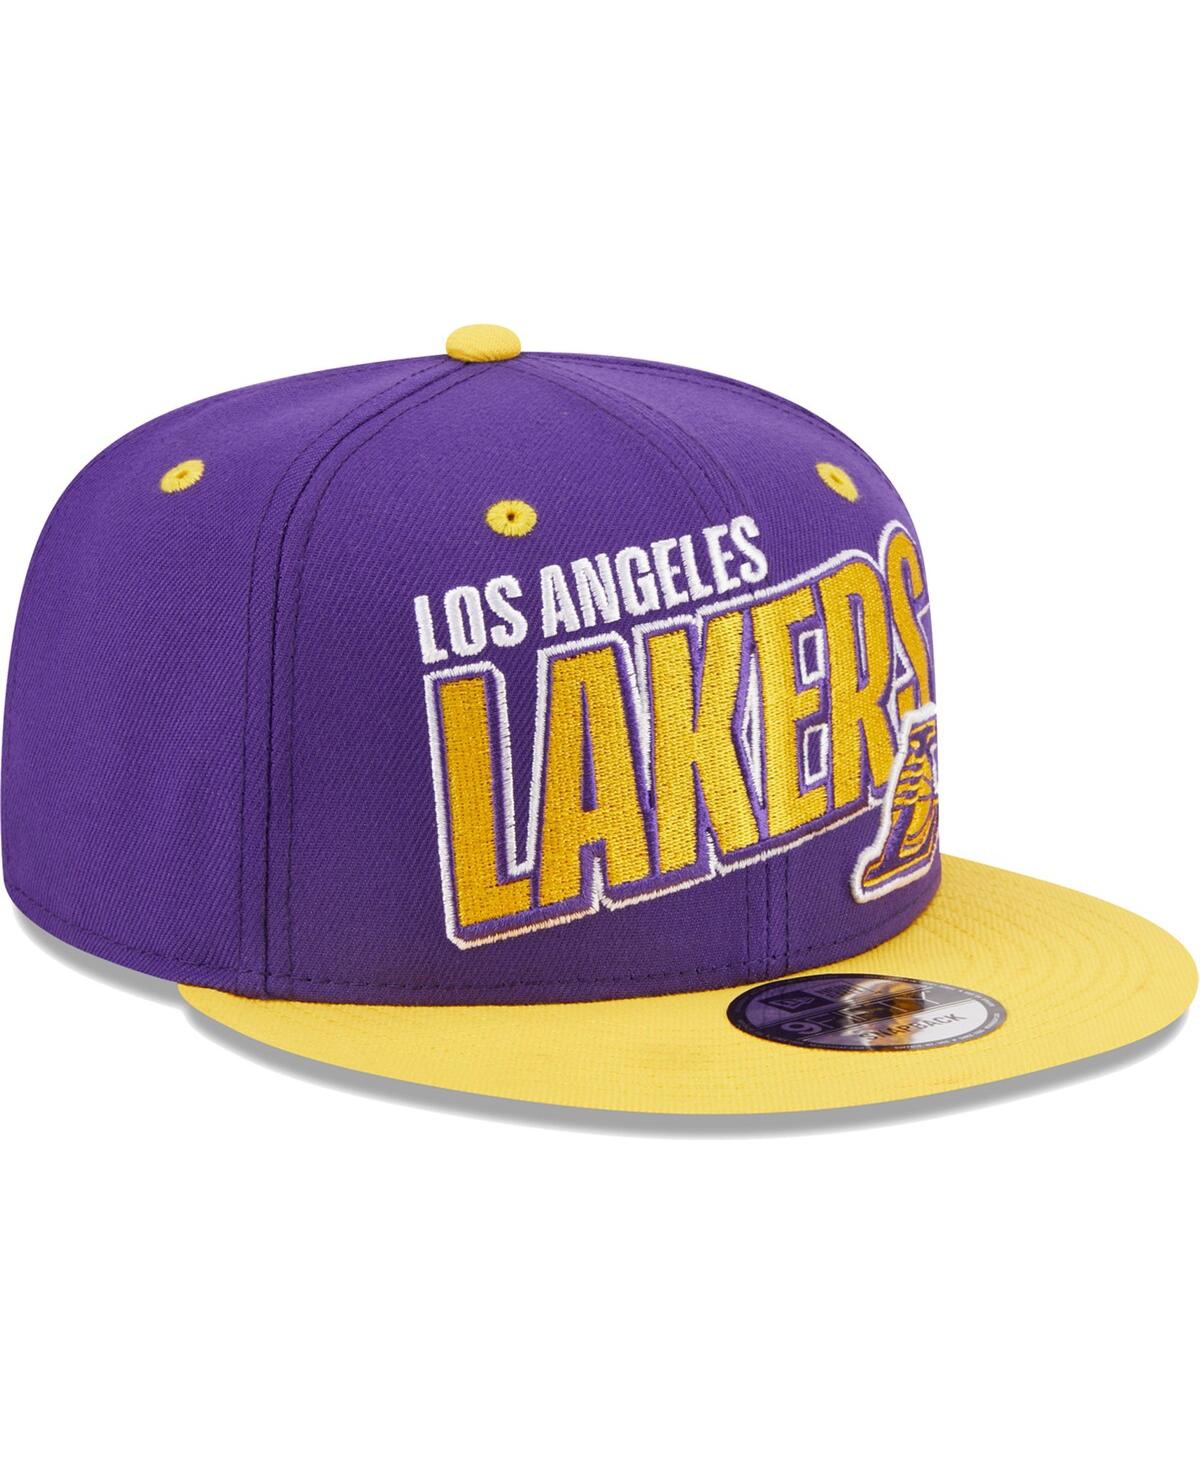 New Era Men's  Purple, Gold Los Angeles Lakers Stacked Slant 2-tone 9fifty Snapback Hat In Purple,gold